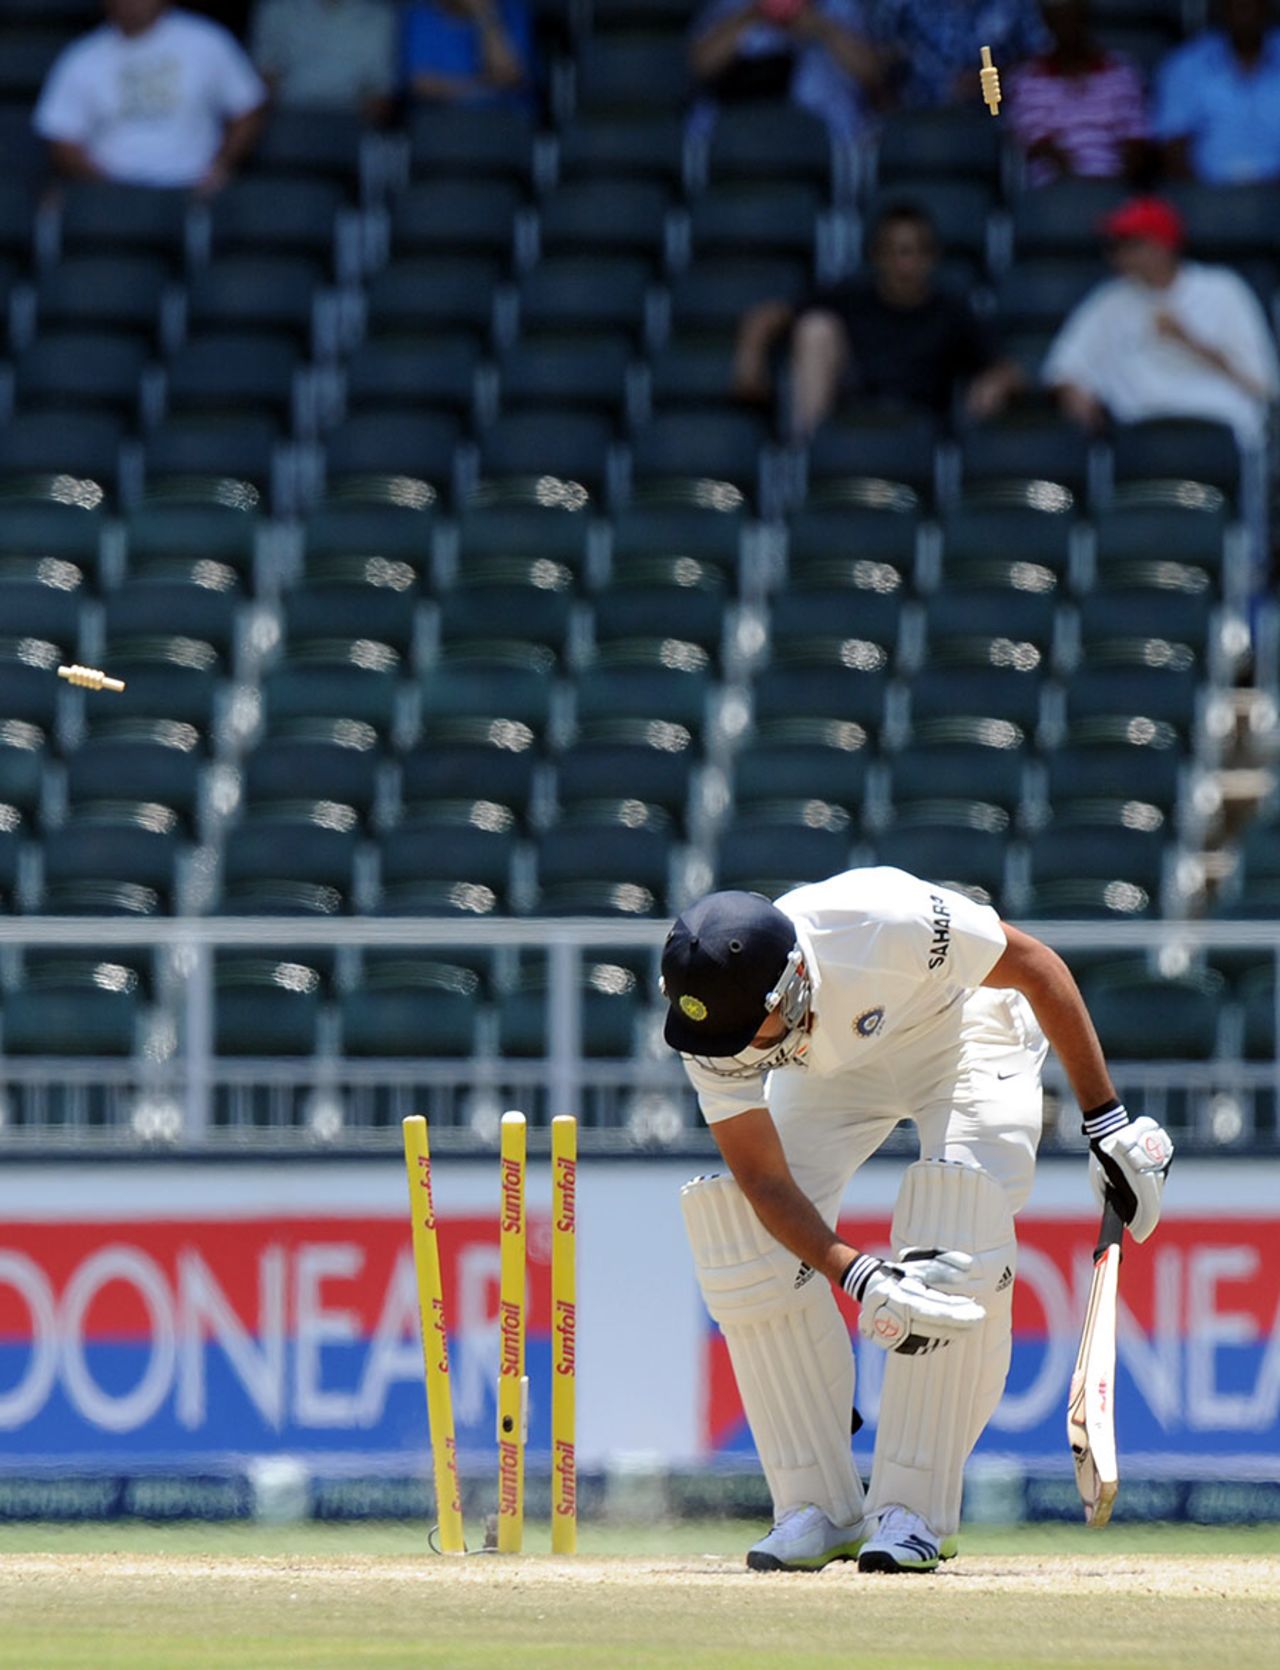 Rohit Sharma is bowled, South Africa v India, 1st Test, Johannesburg, 4th day, December 21, 2013